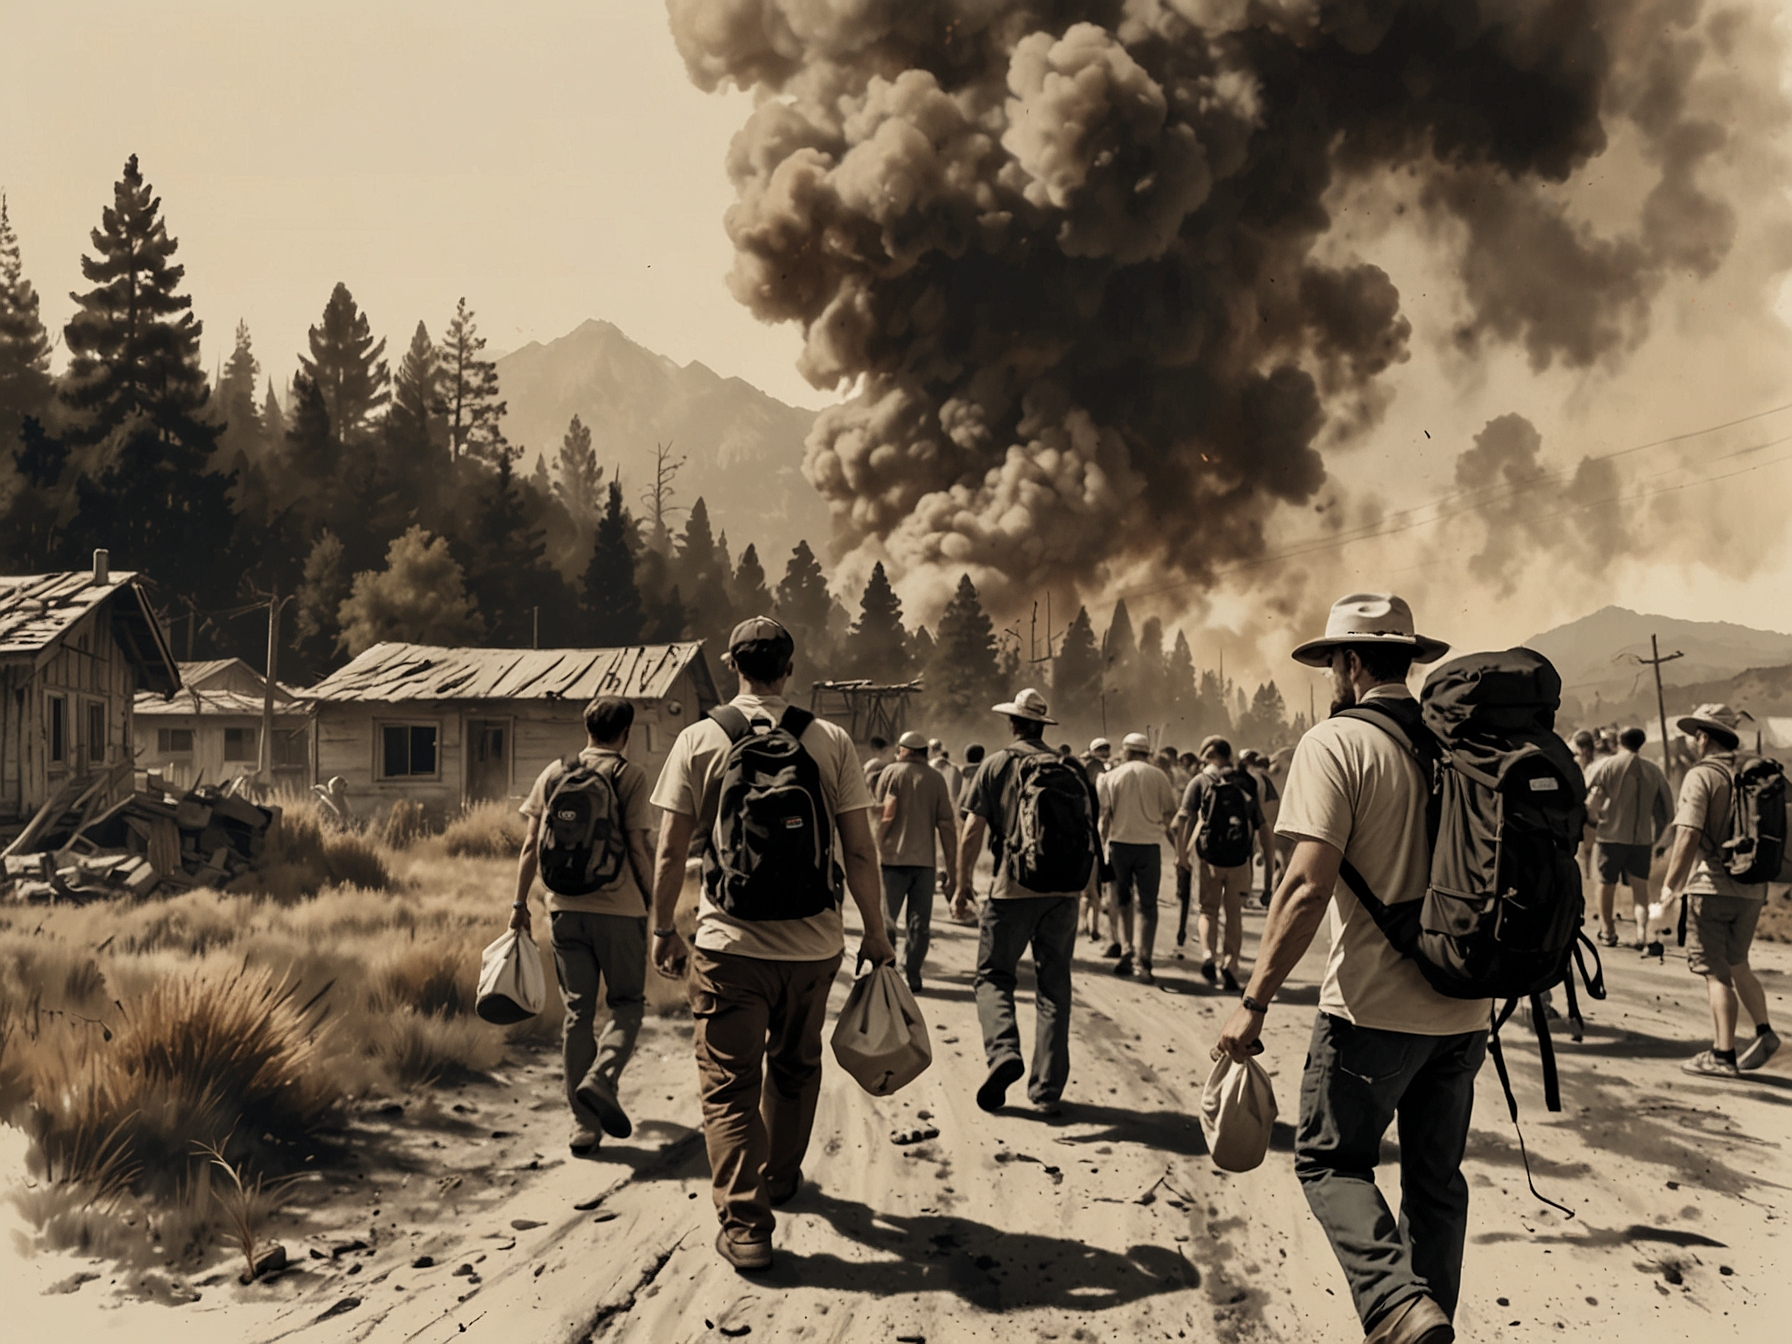 An emergency evacuation scene with tourists and locals fleeing a wildfire-affected area, carrying essentials. Flames and smoke fill the background, highlighting the severity of the situation.